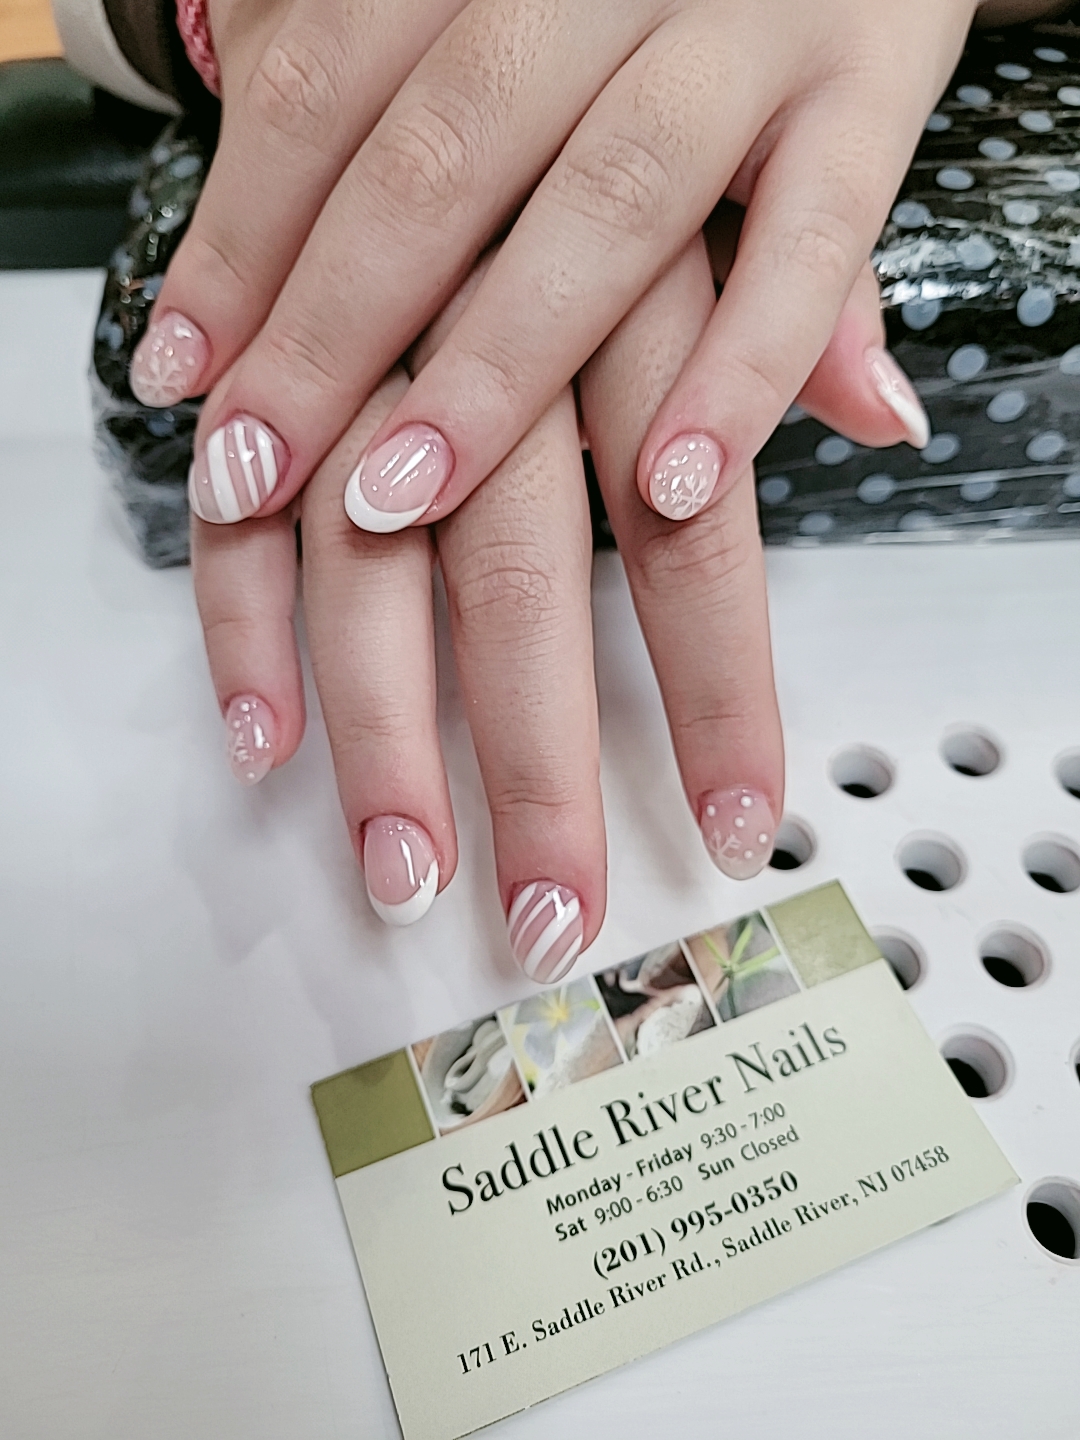 SADDLE RIVER NAILS 171 E Saddle River Rd, Saddle River New Jersey 07458